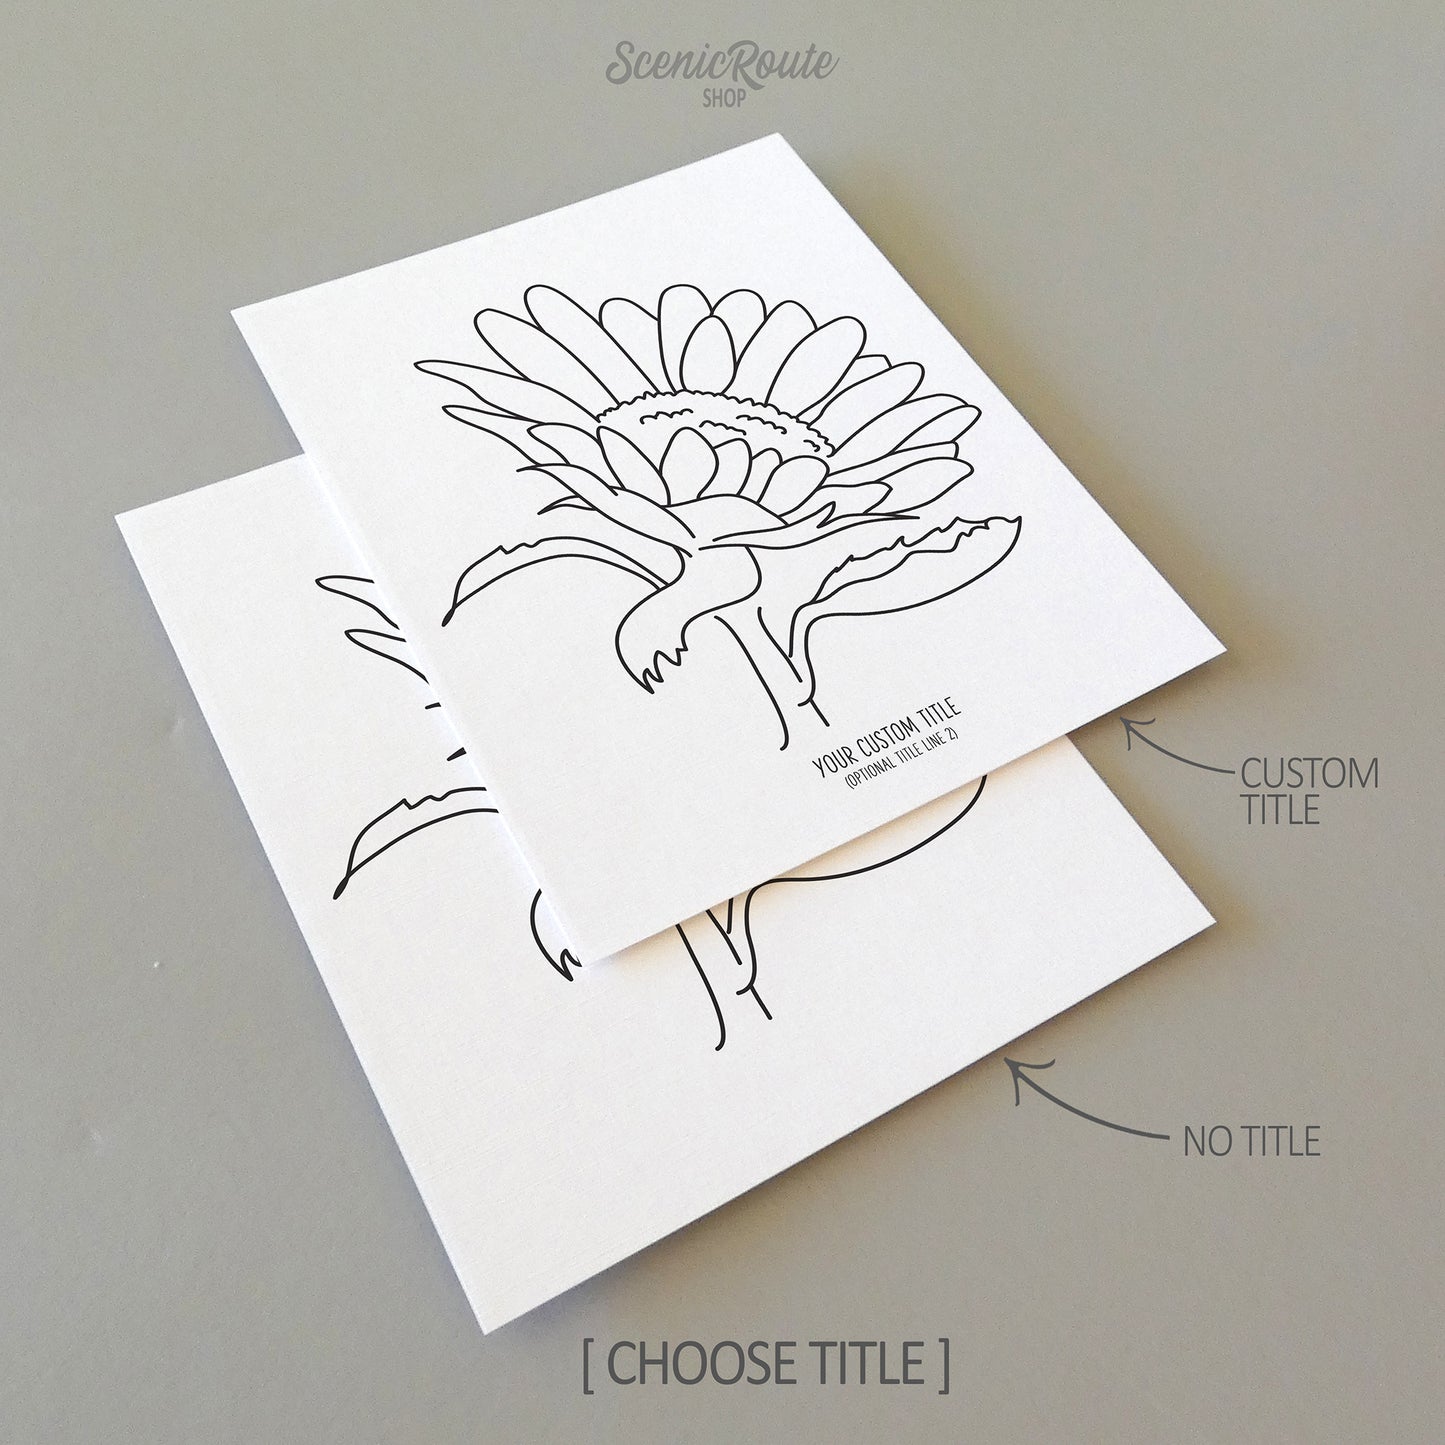 Two line art drawings of a Sunflower on white linen paper with a gray background.  The pieces are shown with “No Title” and “Custom Title” options for the available art print options.